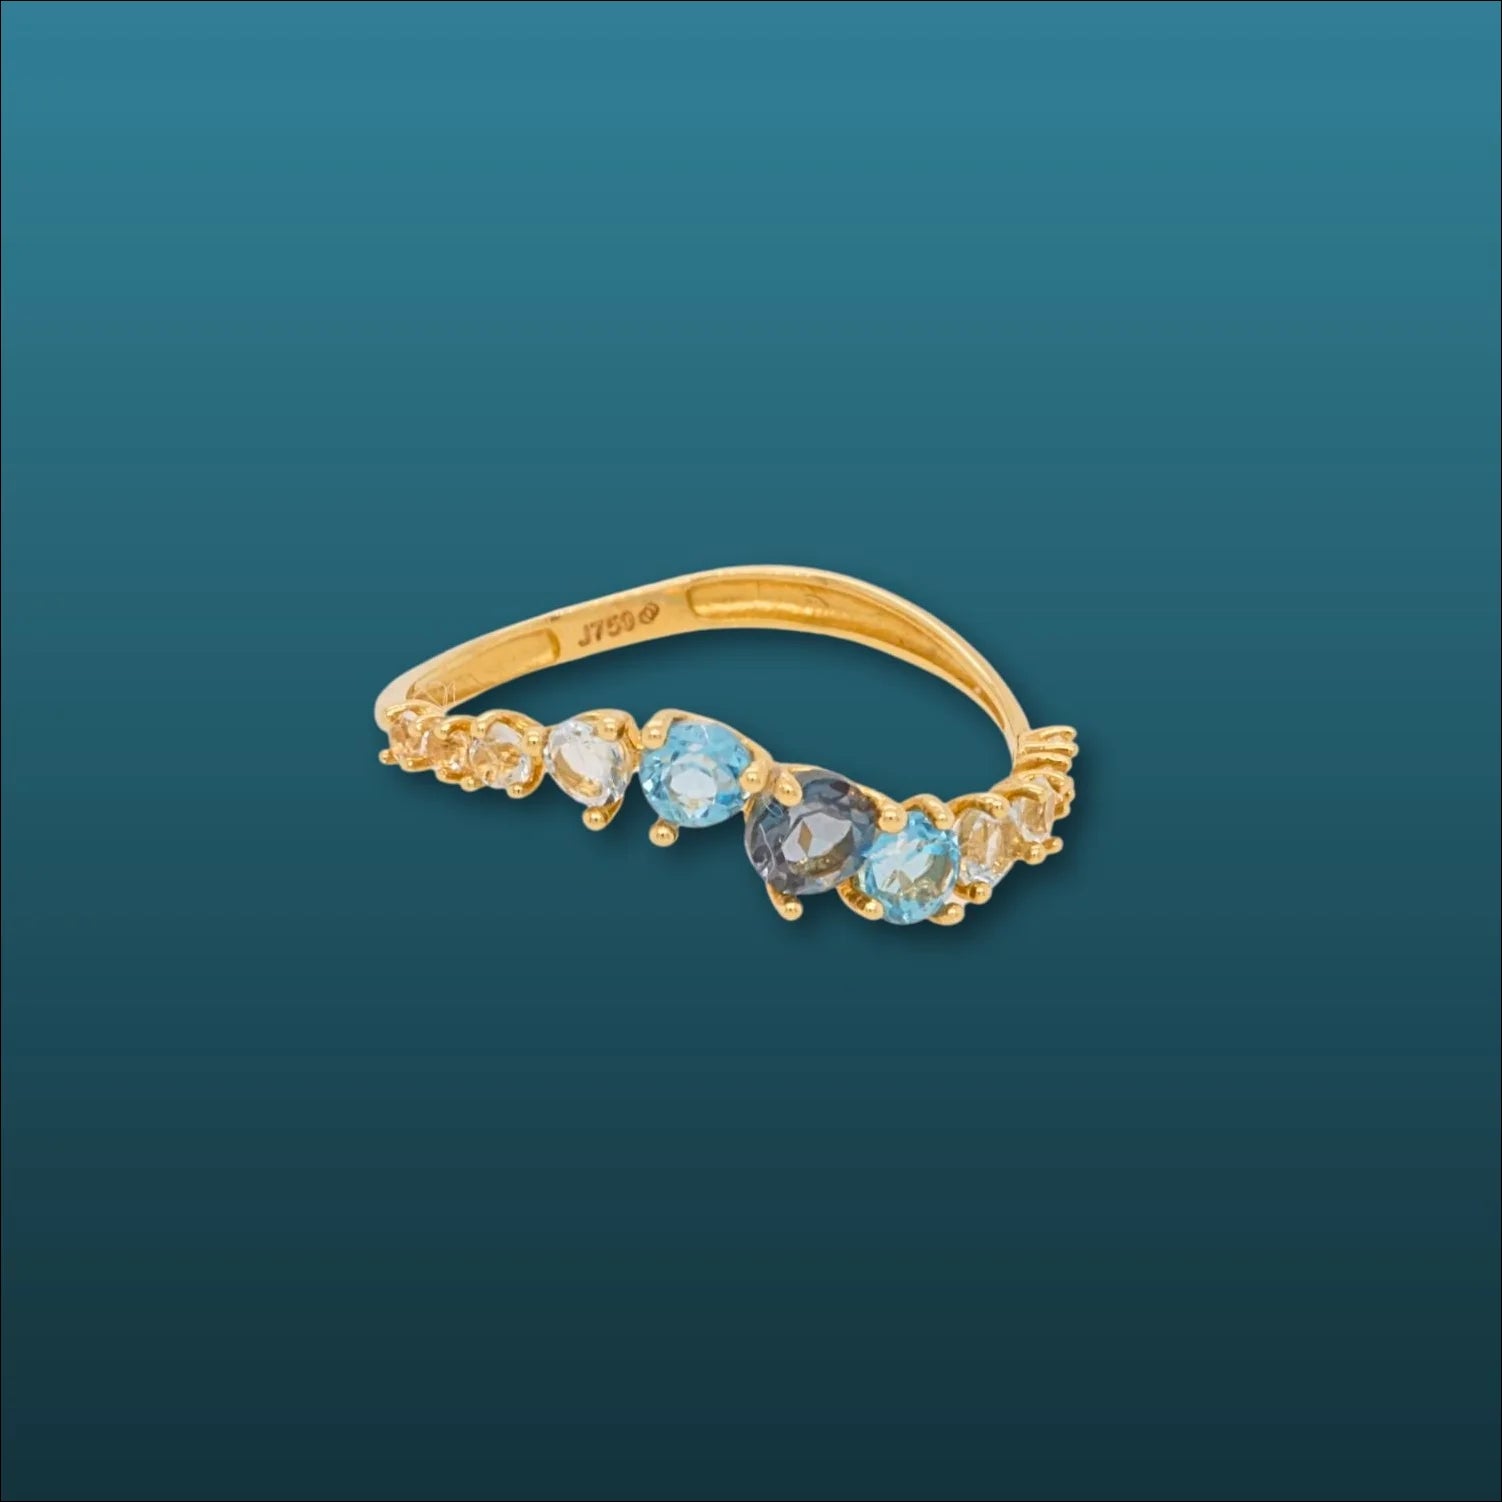 Tranquil gradient cz 18k gold ring | Rings